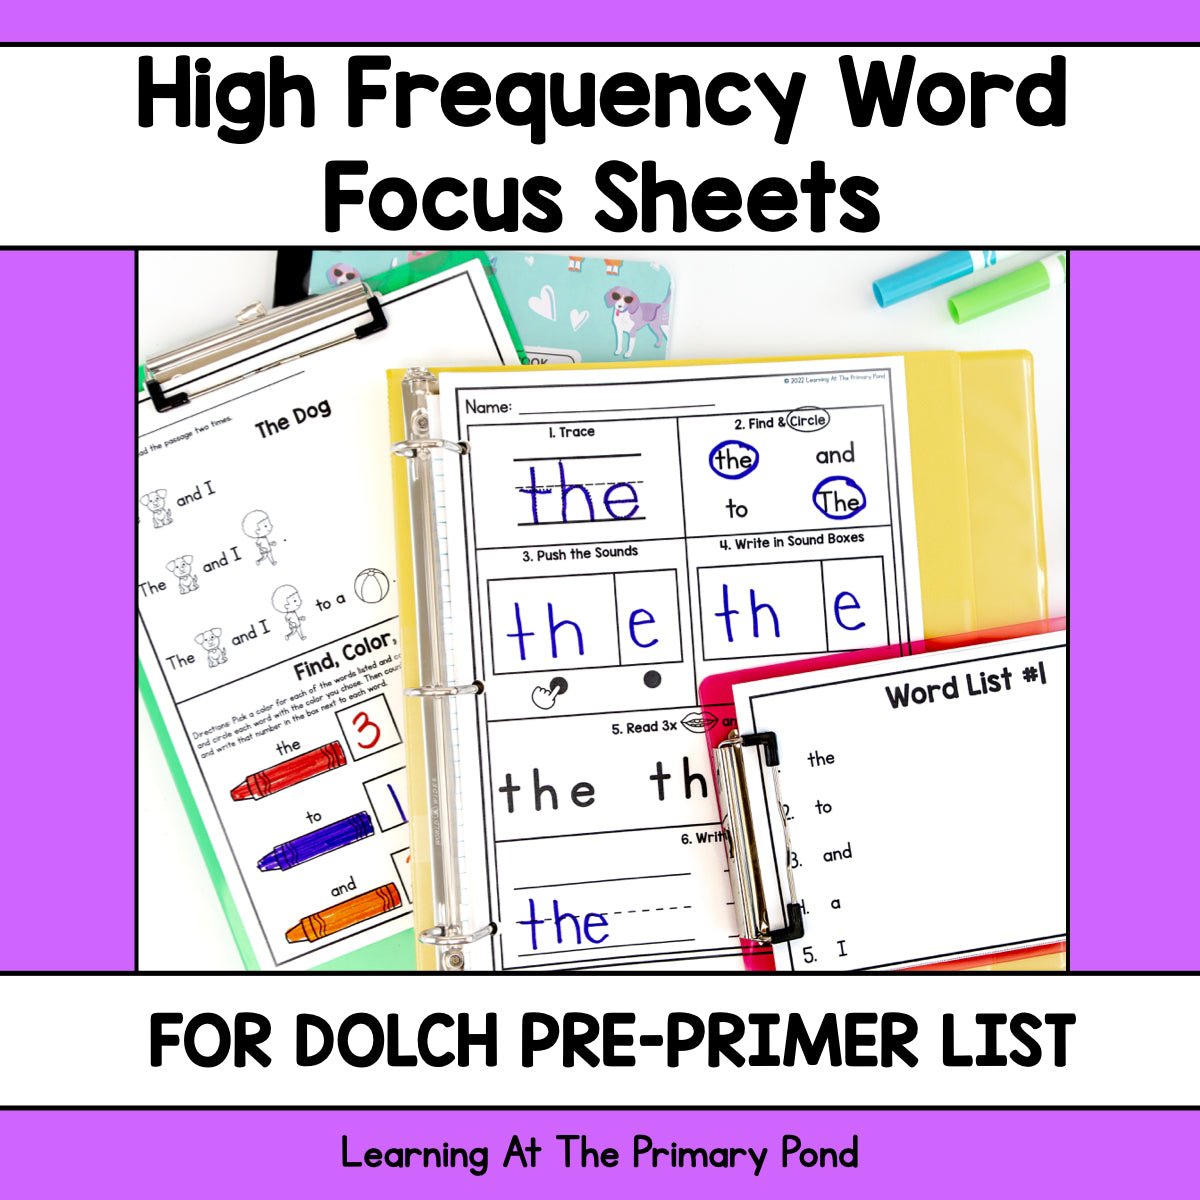 High Frequency Word Worksheets | Dolch Sight Word List Pre-Primer - learning-at-the-primary-pond